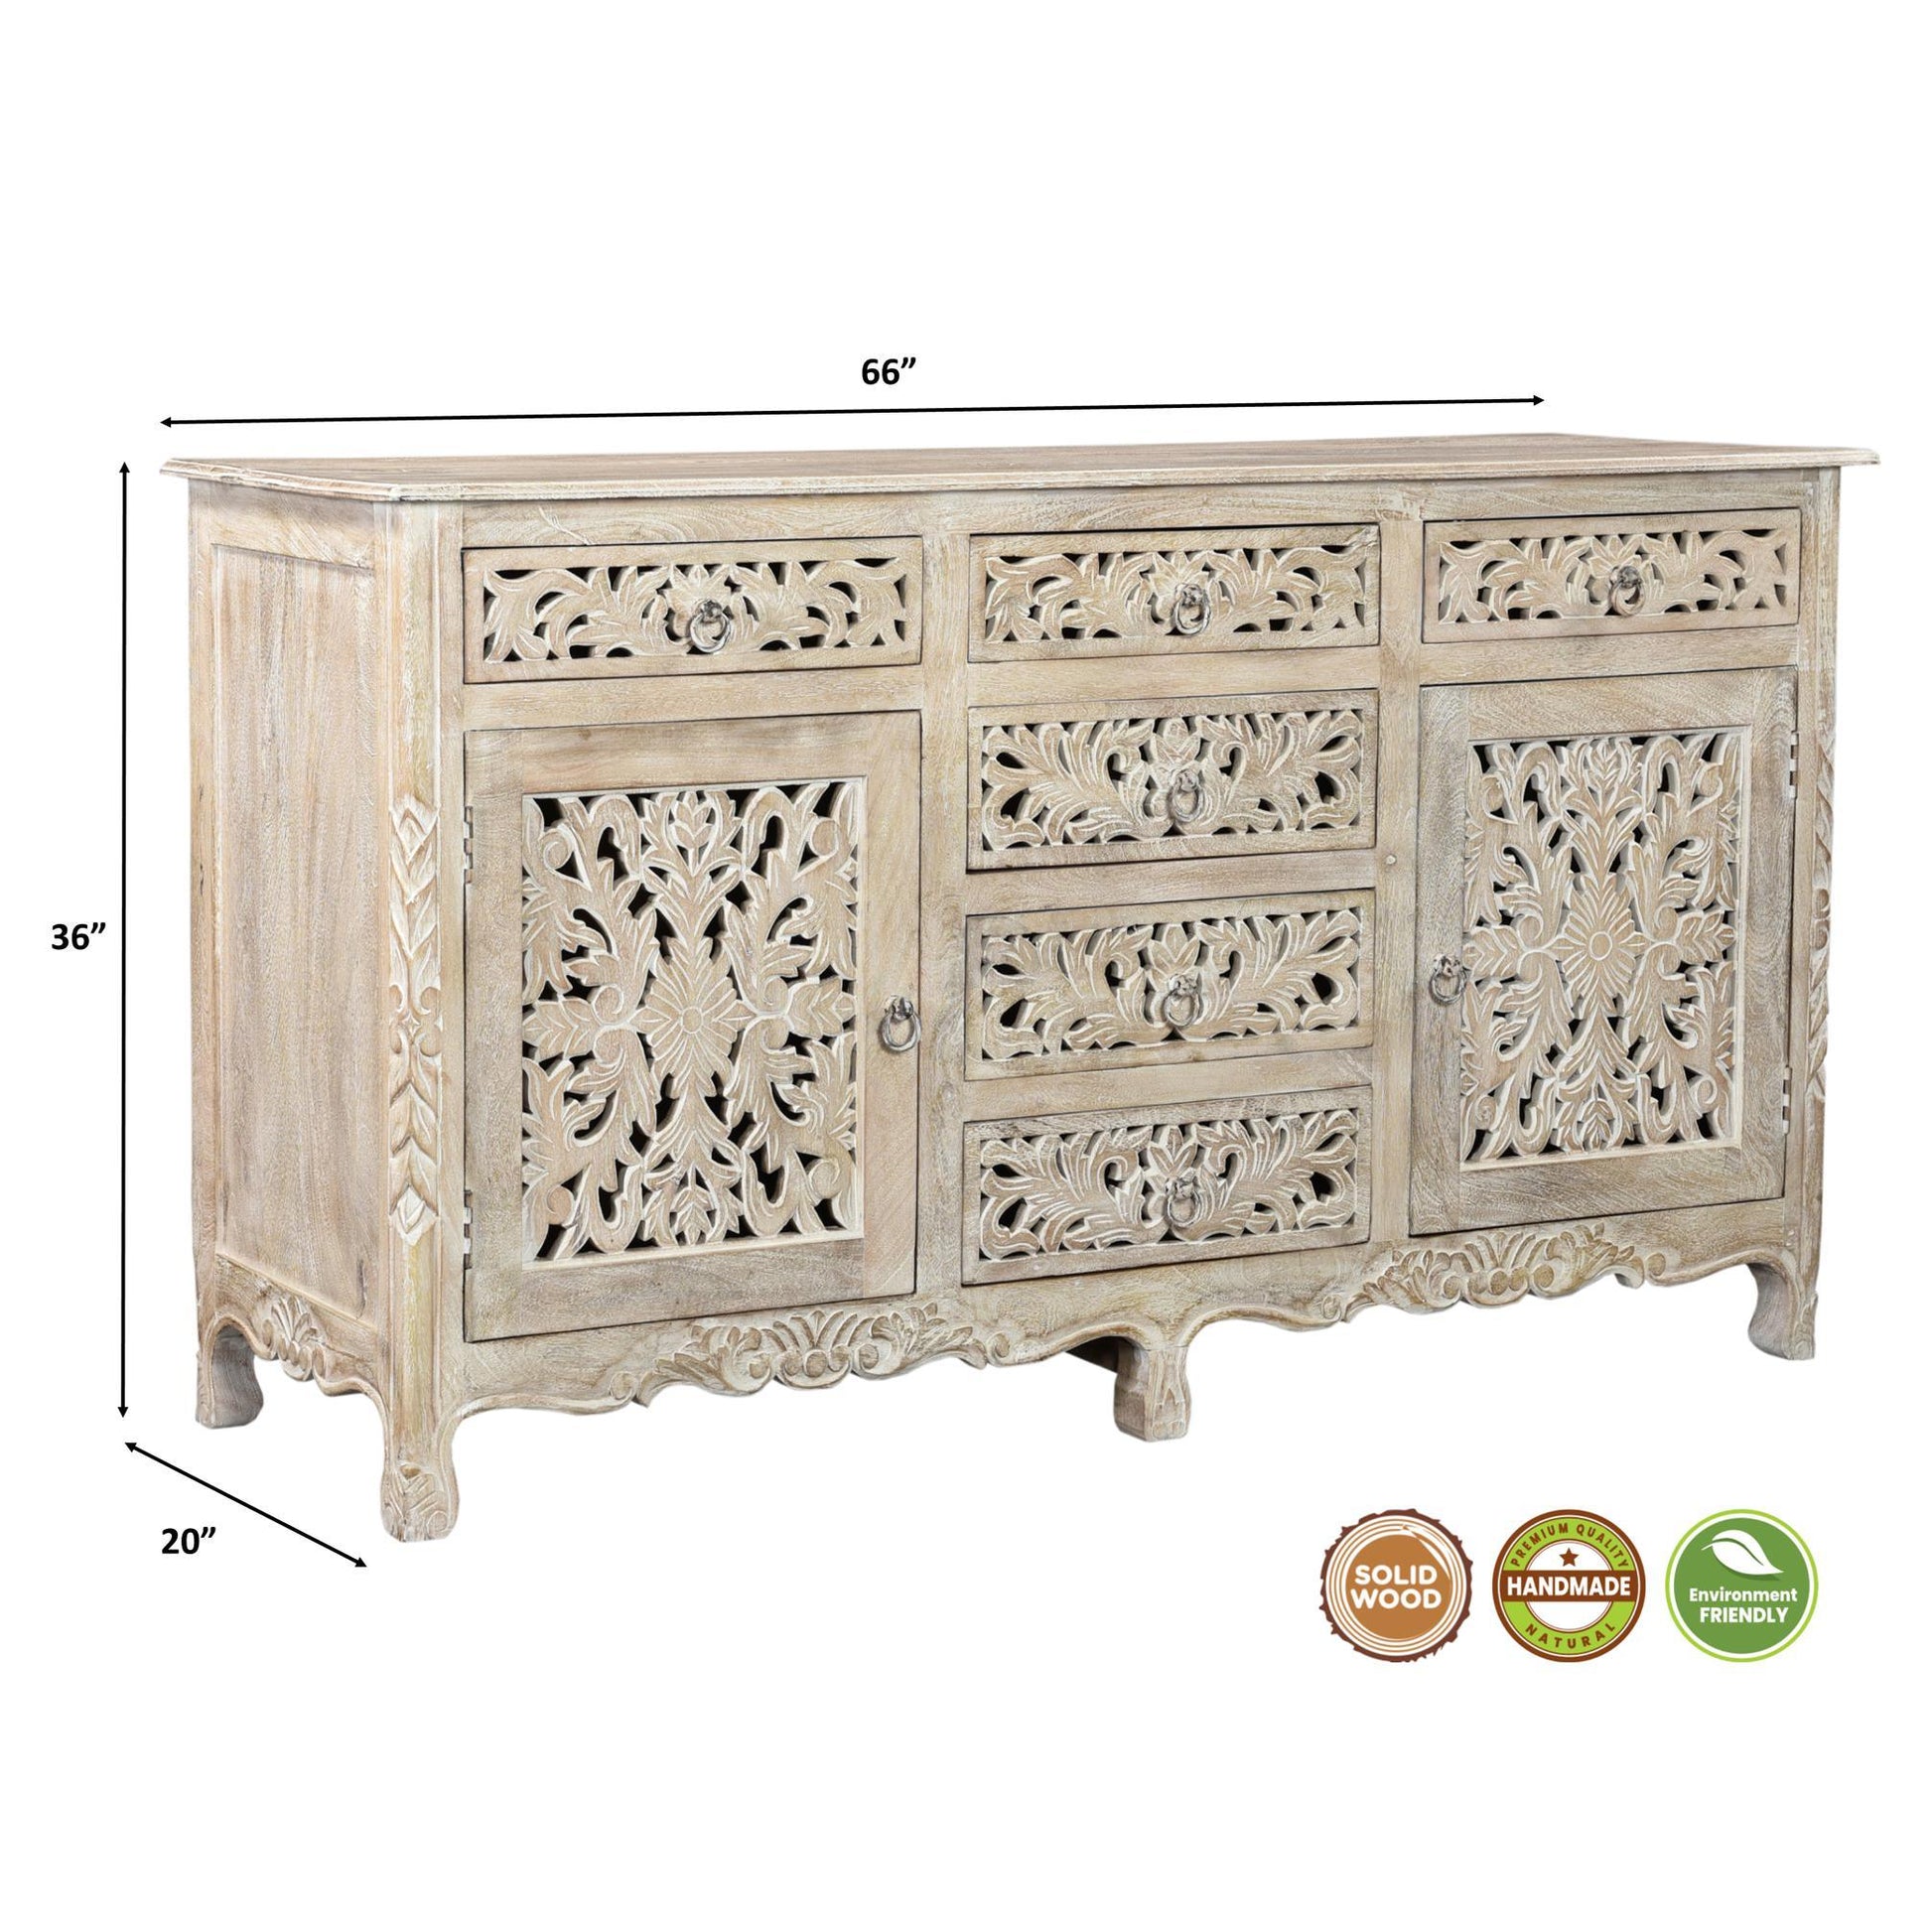 Lawrence 66 inches Floral Carved Sideboard in Distressed White - Sideboards and Things Brand_LOOMLAN Home, Color_White, Features_Handmade, Features_Handmade/Handcarved, Features_Repurposed Materials, Features_With Drawers, Finish_Distressed, Finish_Whitewashed, Hinges, Materials_Reclaimed Wood, Materials_Wood, Shelf Material_Wood, Table Top_Wood, Width_60-70, Wood Species_Mango